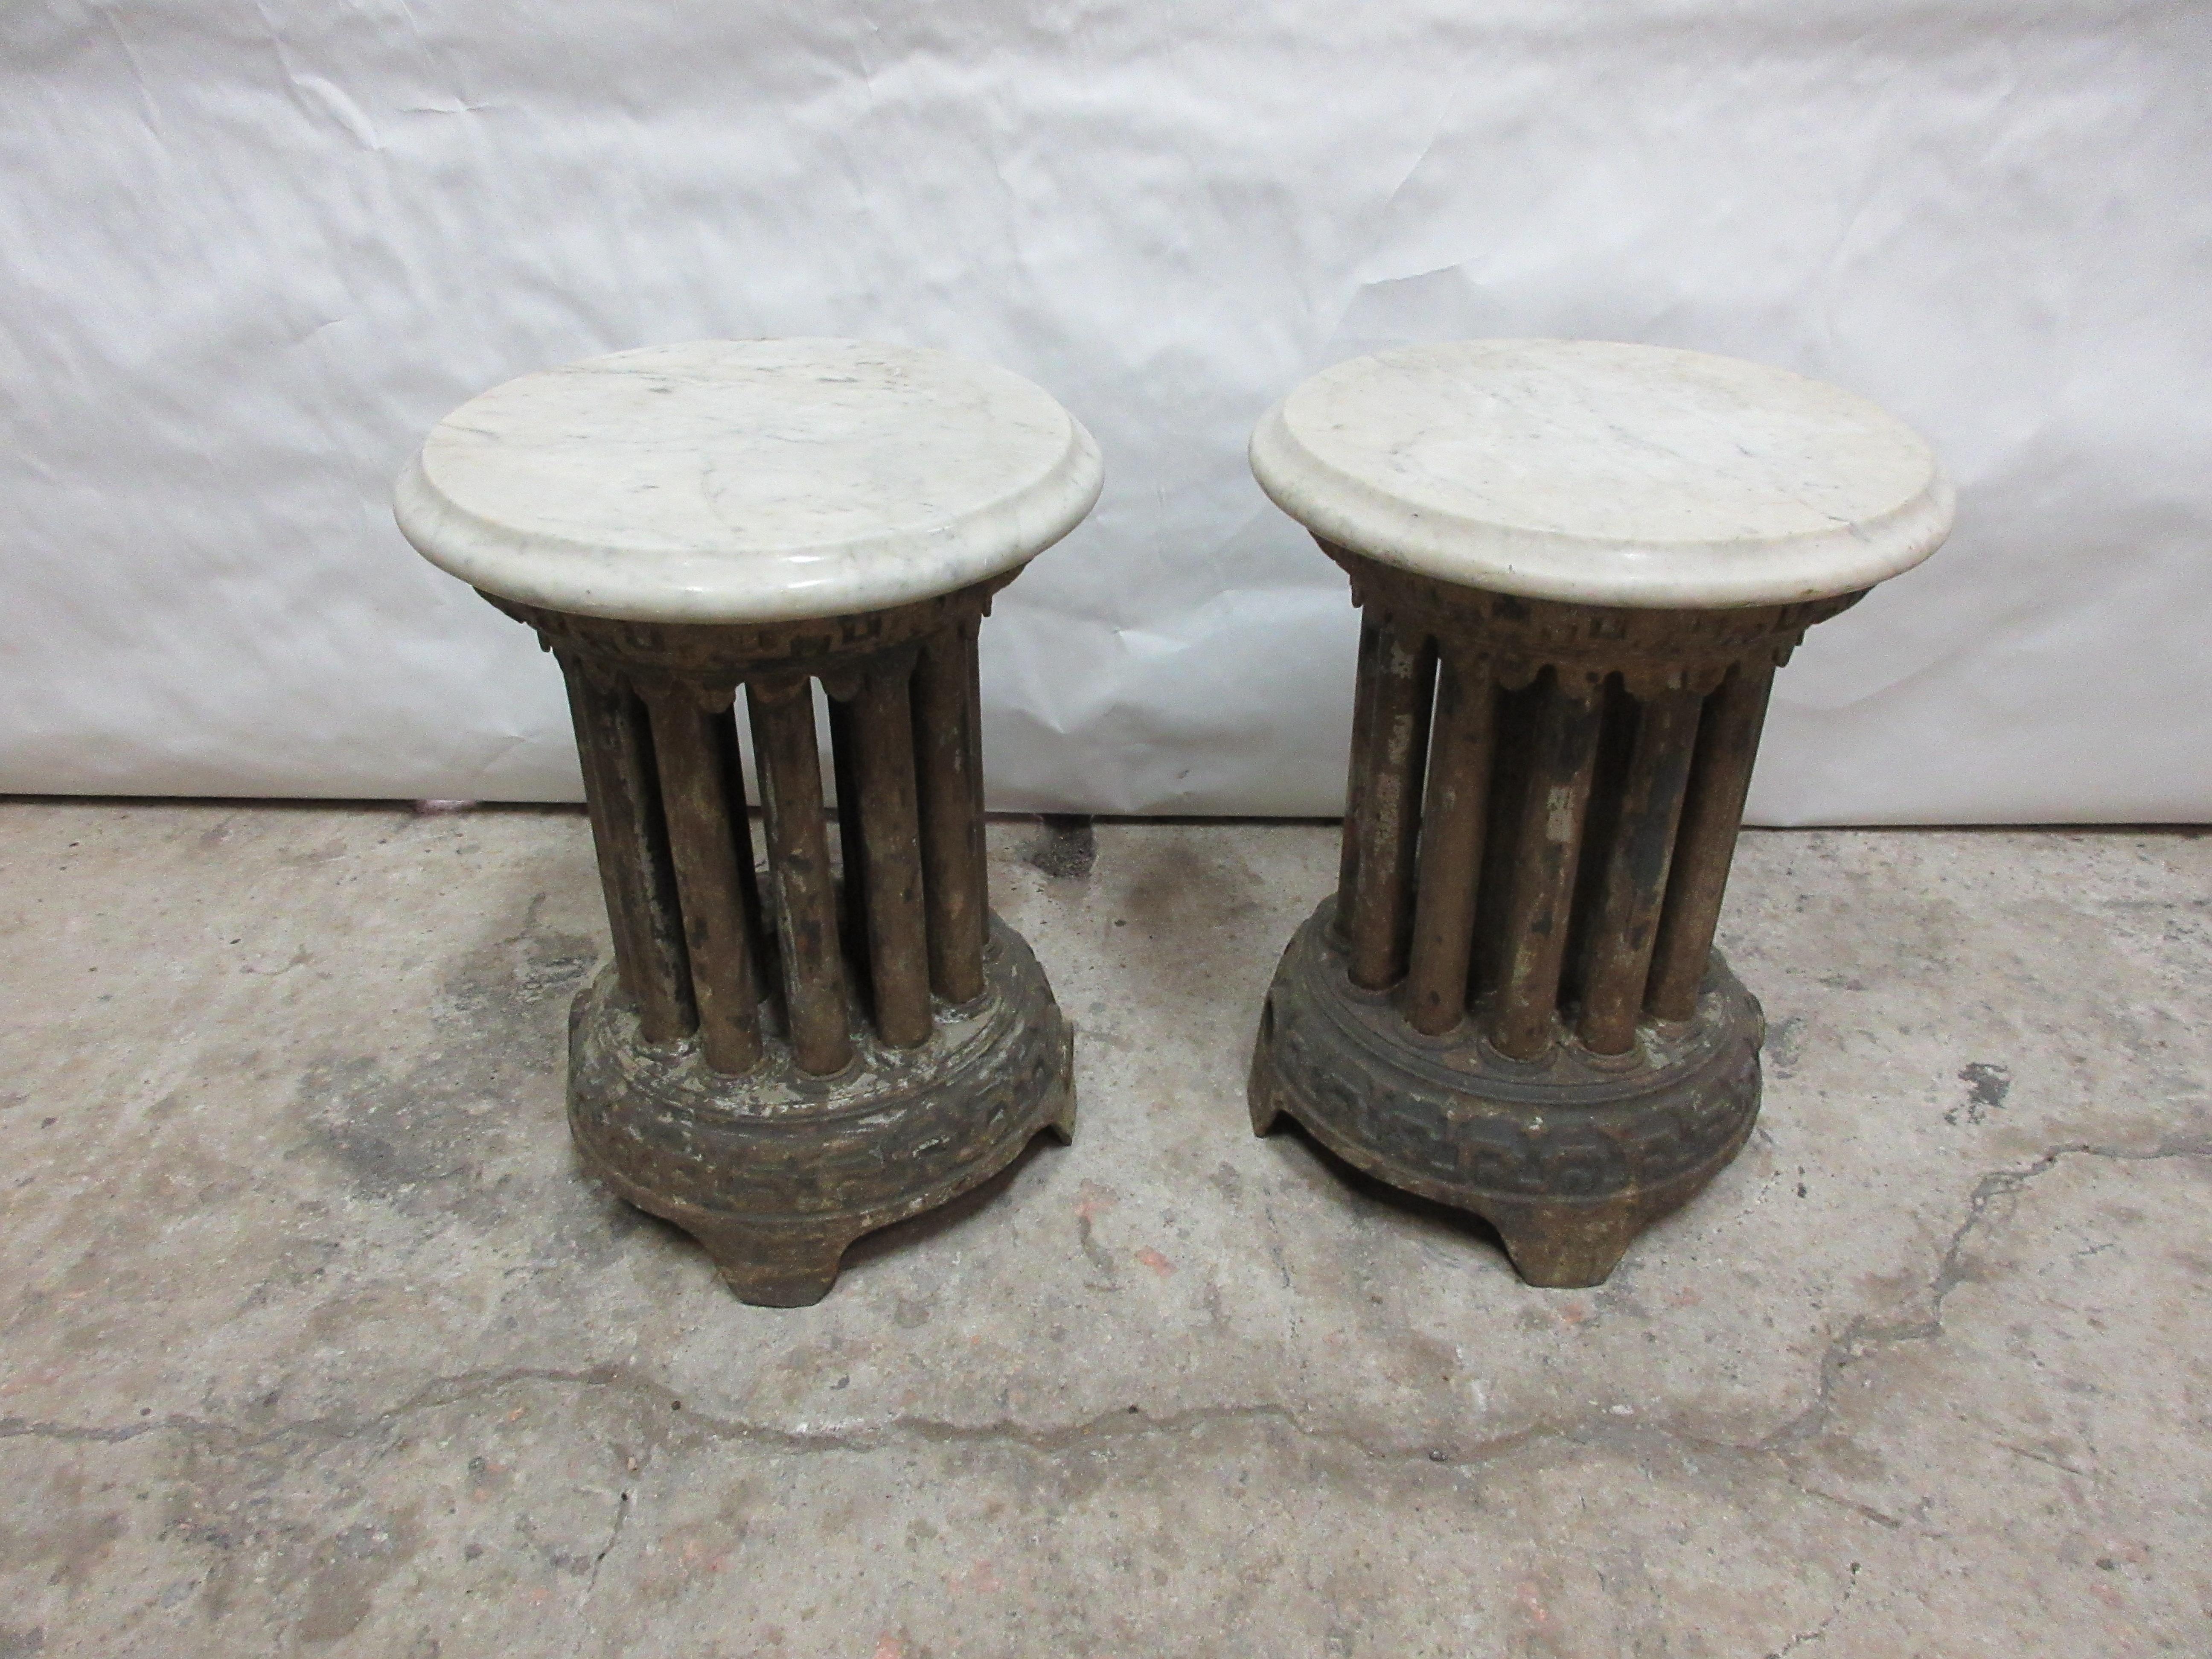 This is a one of a kind set of industrial side tables made out of Antique hot water radiators.